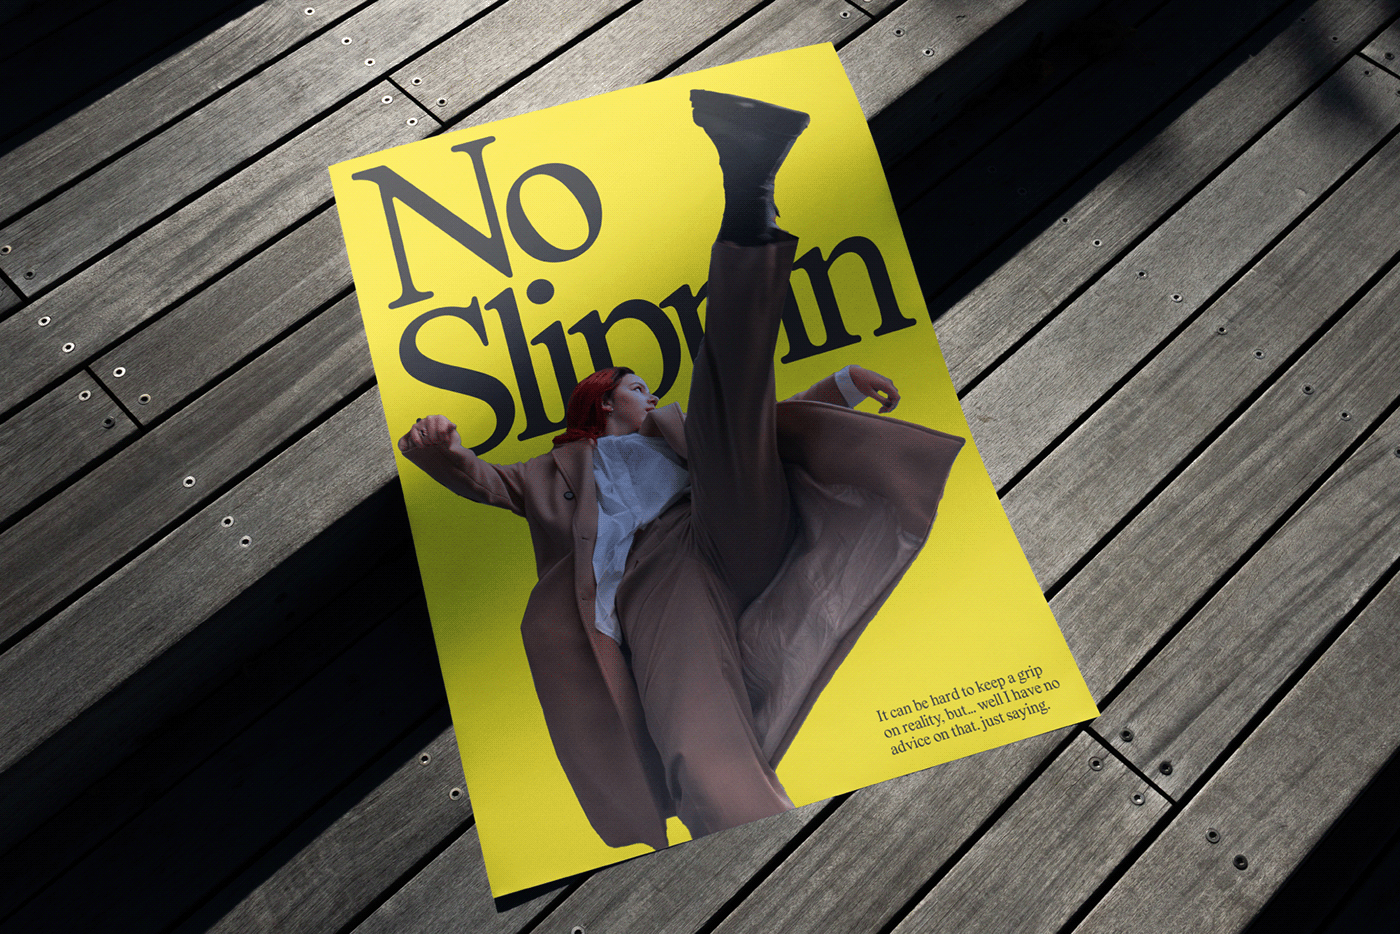 poster of a girl slipping that says no slippin